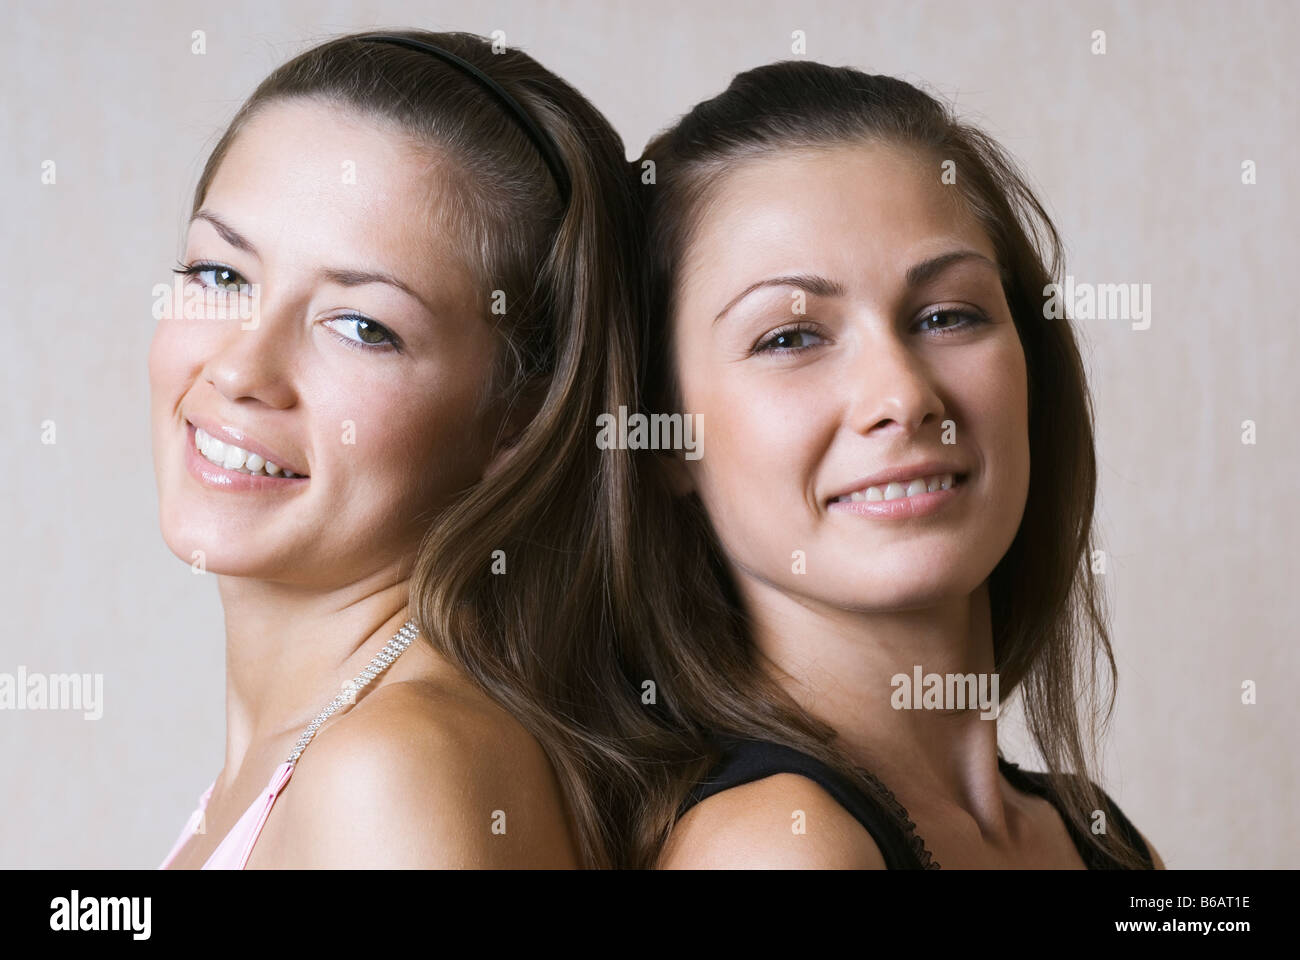 Portrait of two young women back to back Stock Photo